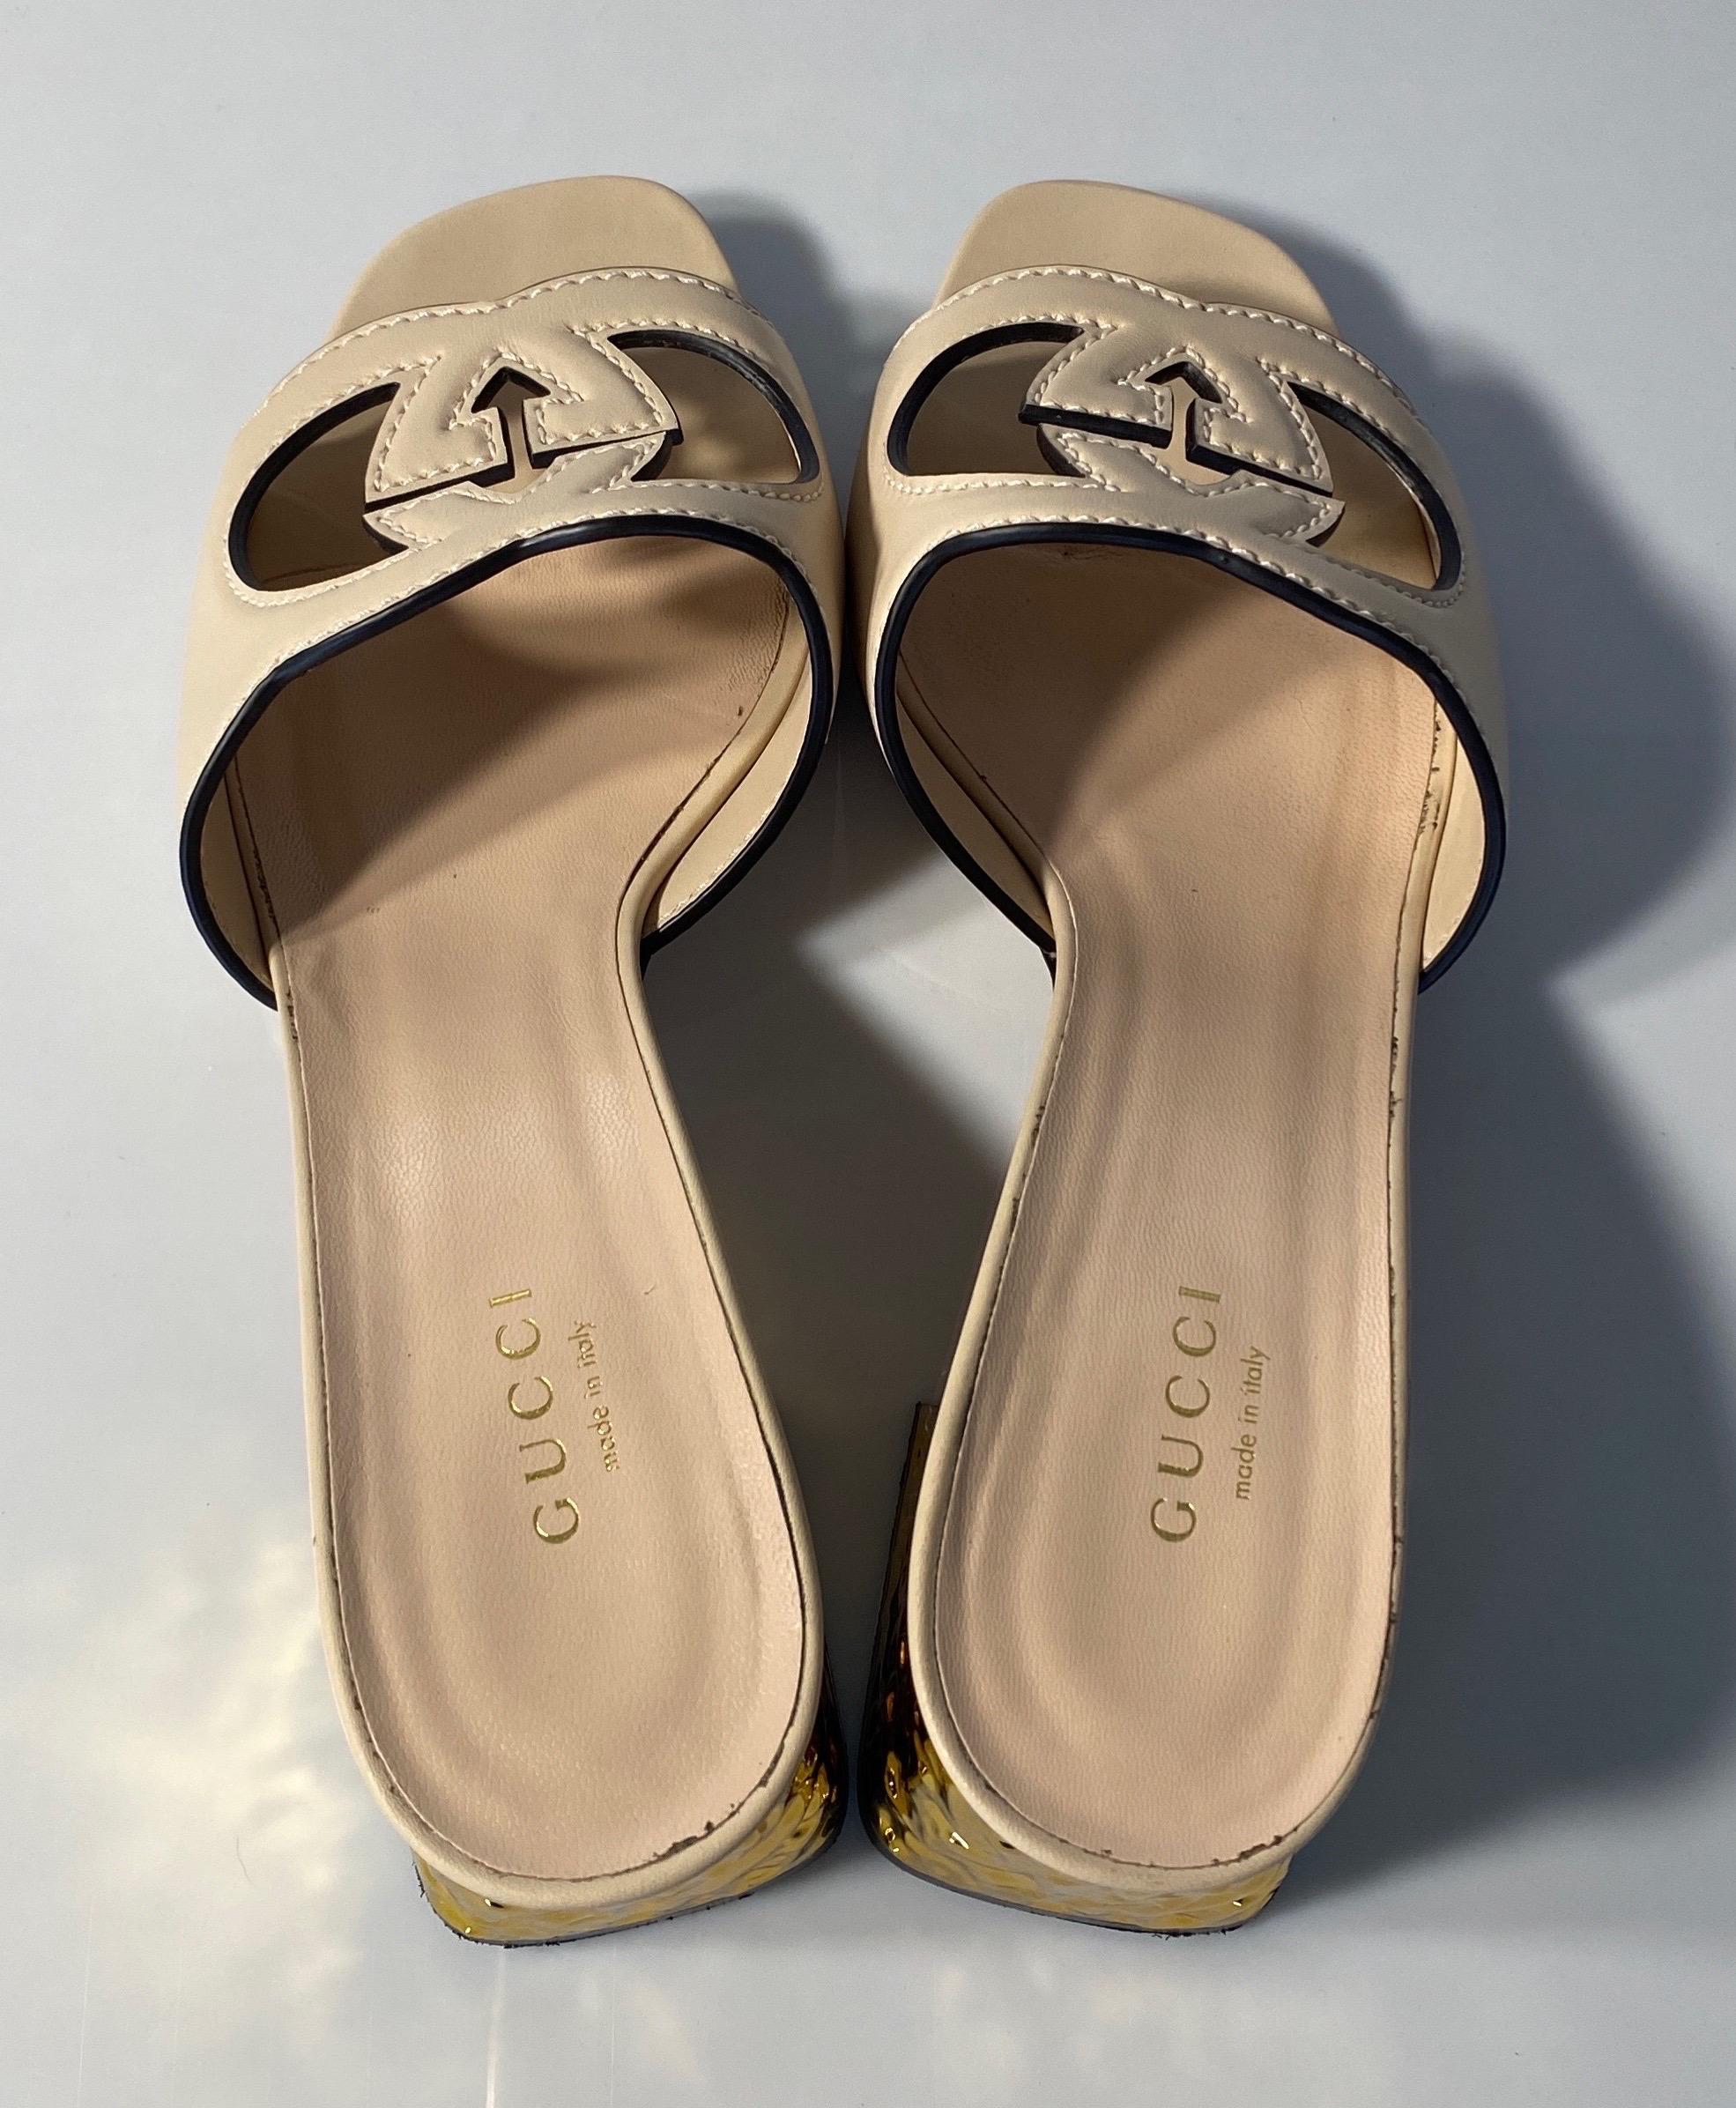 Gucci Rose Leather Interlocking G Cut-out Sandal - Size 37.5 10